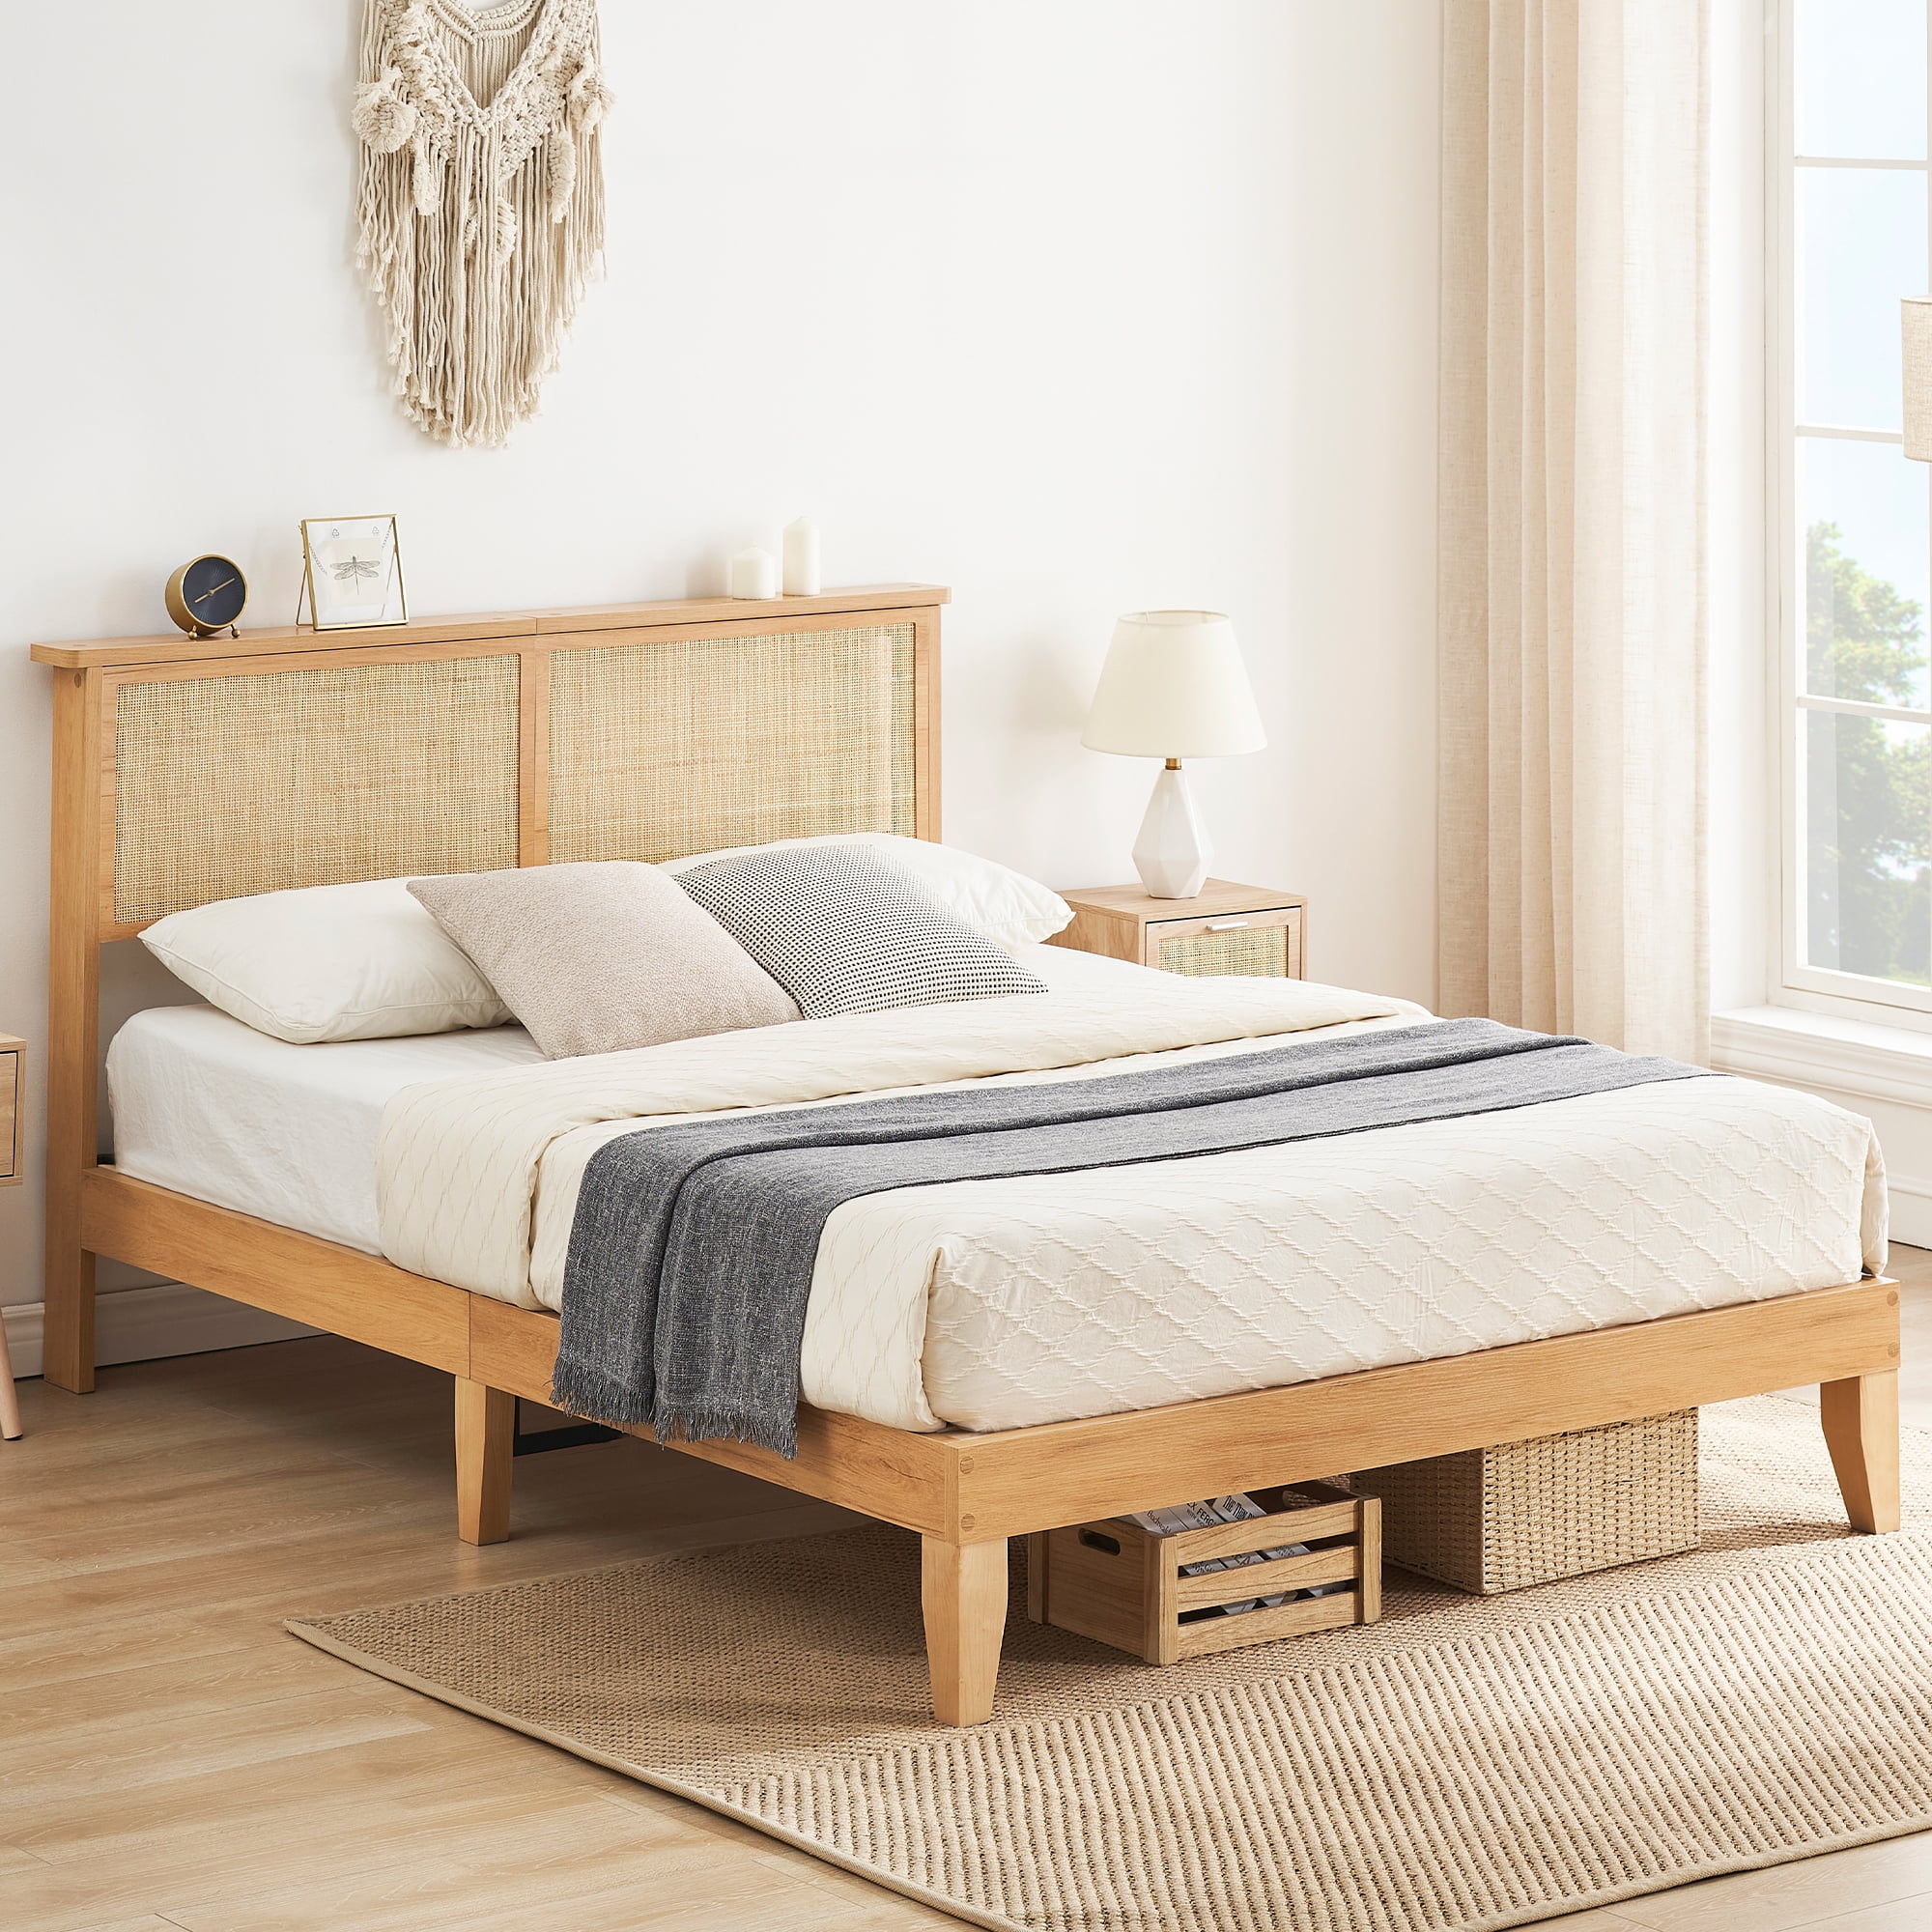 Classic Home Furniture Bedroom Solid Wooden Rattan Beds Frame King Size  Double Bed Frame Queen Design - China Bedroom Bed, Sofa Bed